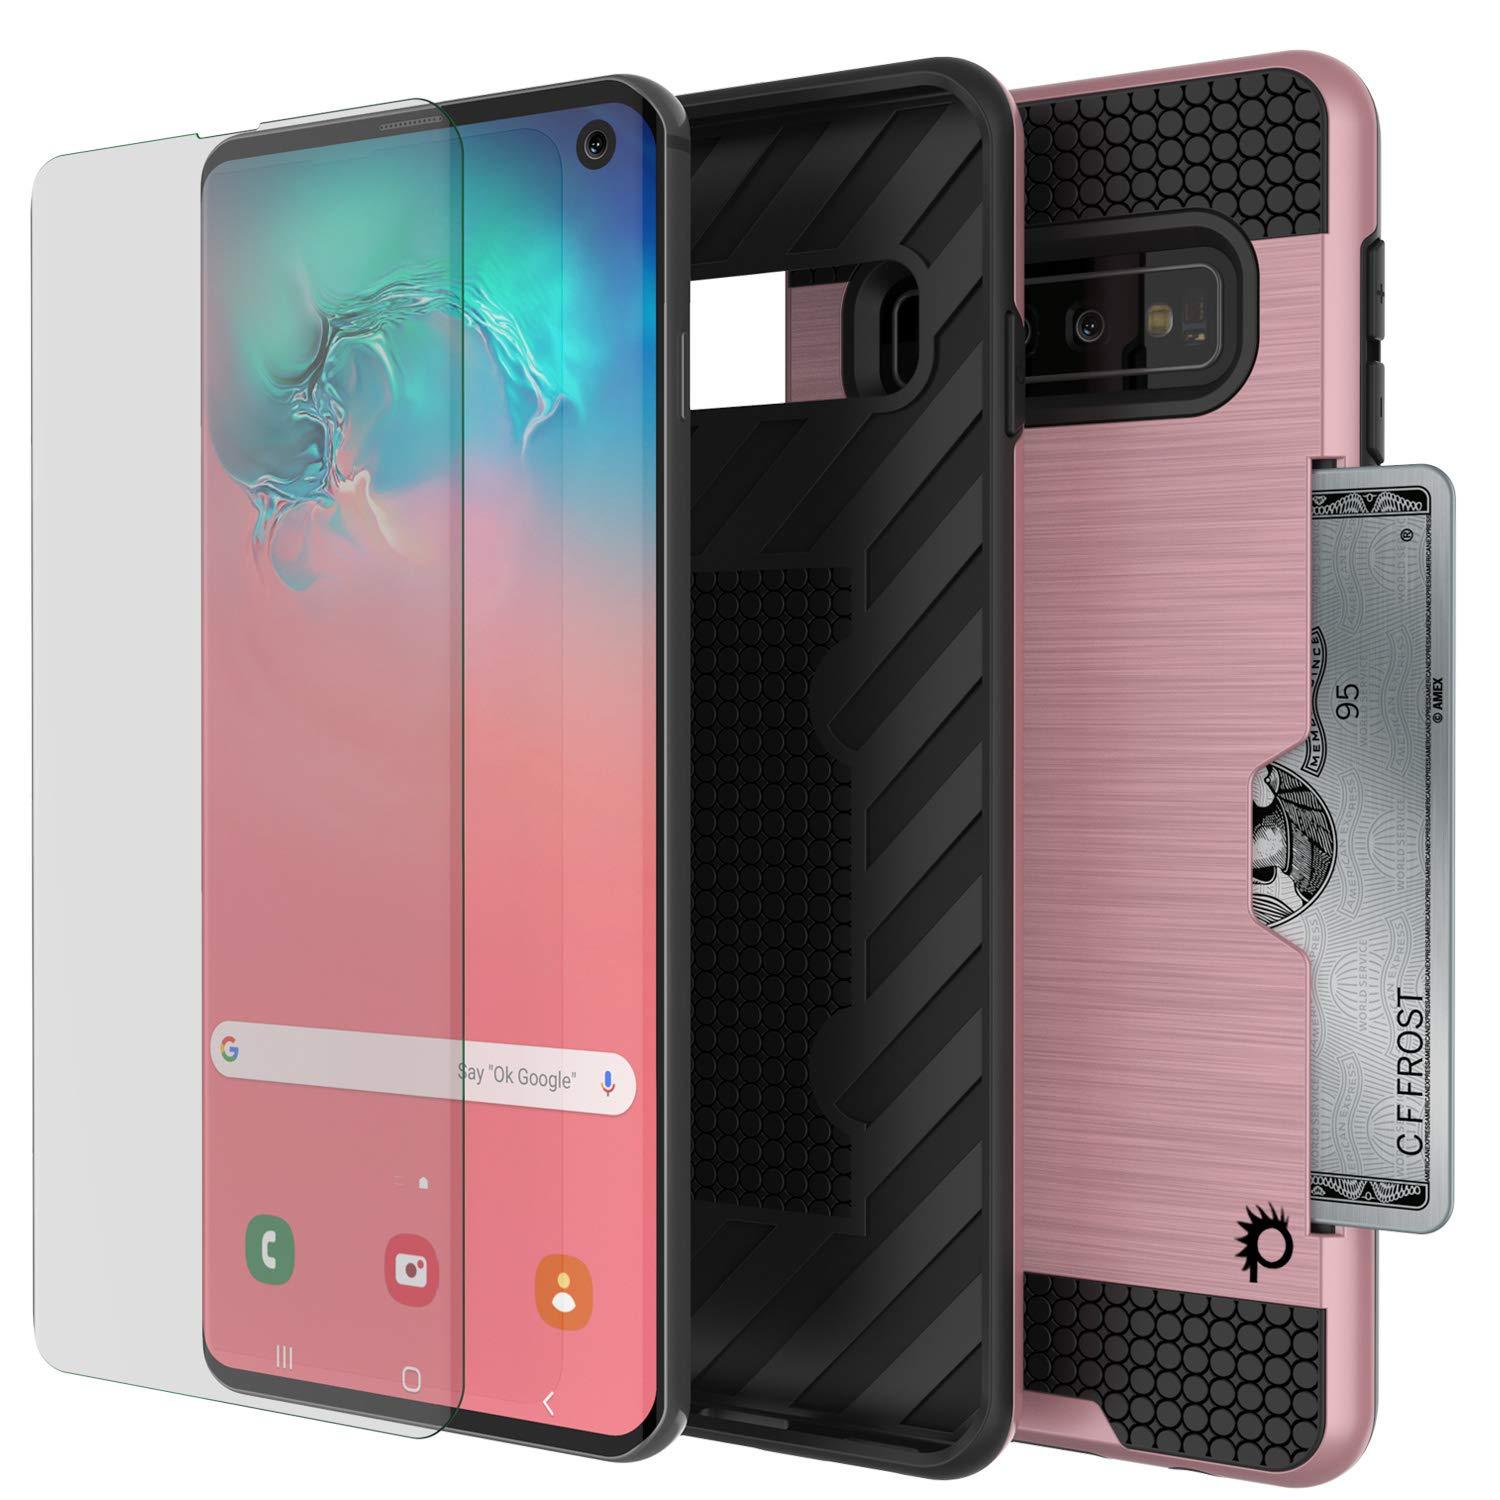 Galaxy S10e Case, PUNKcase [SLOT Series] [Slim Fit] Dual-Layer Armor Cover w/Integrated Anti-Shock System, Credit Card Slot [Rose Gold]